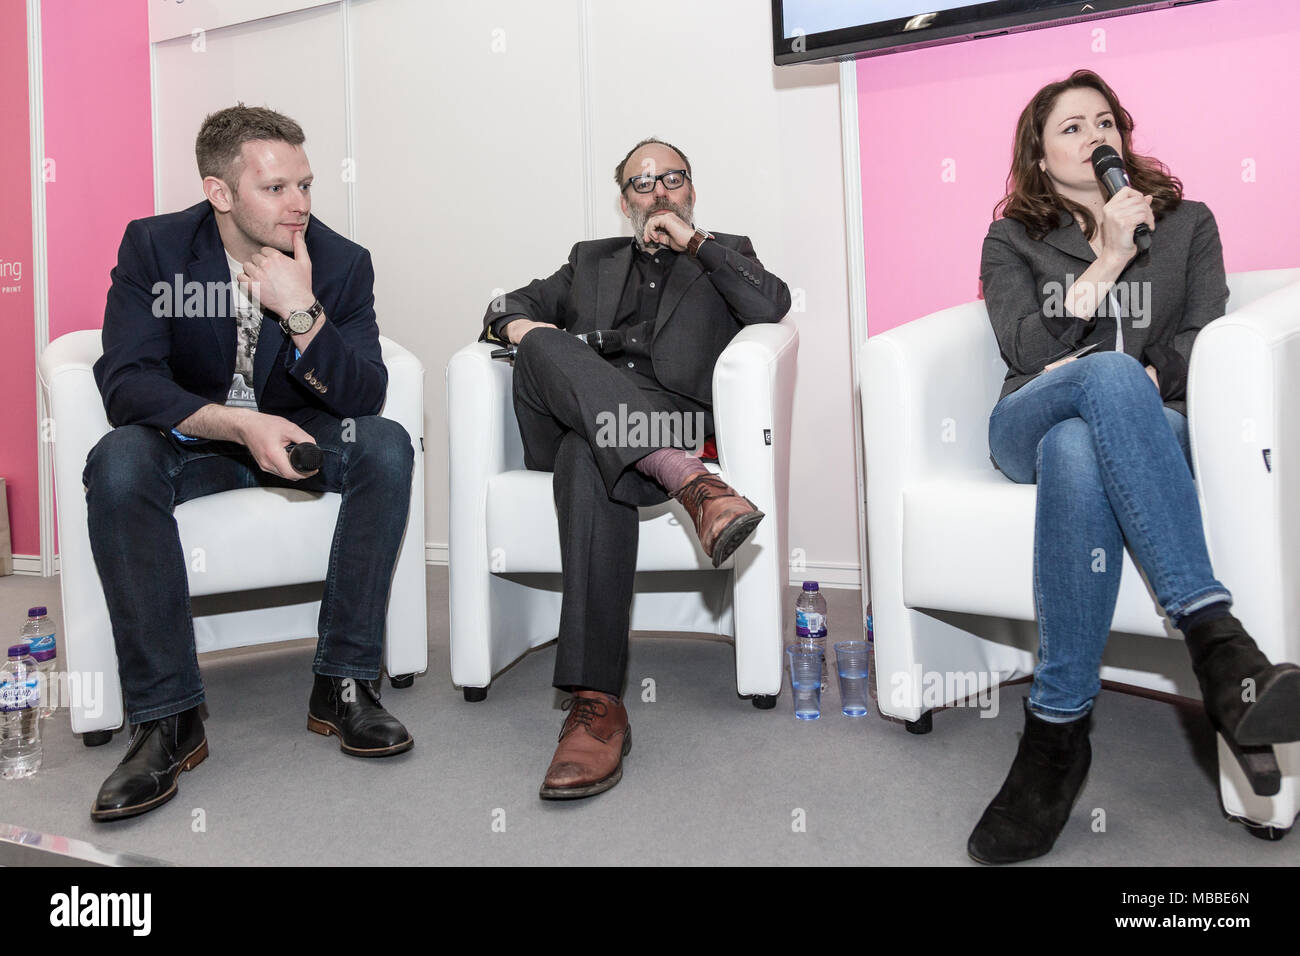 London, UK, April 10, 2018: Authors Joseph Alexander, LJ Ross and  Mark Dawson during the 2018 London Book Fair in Olympia Exhibition Centre in London. Credit: Michal Busko/Alamy Live News Stock Photo